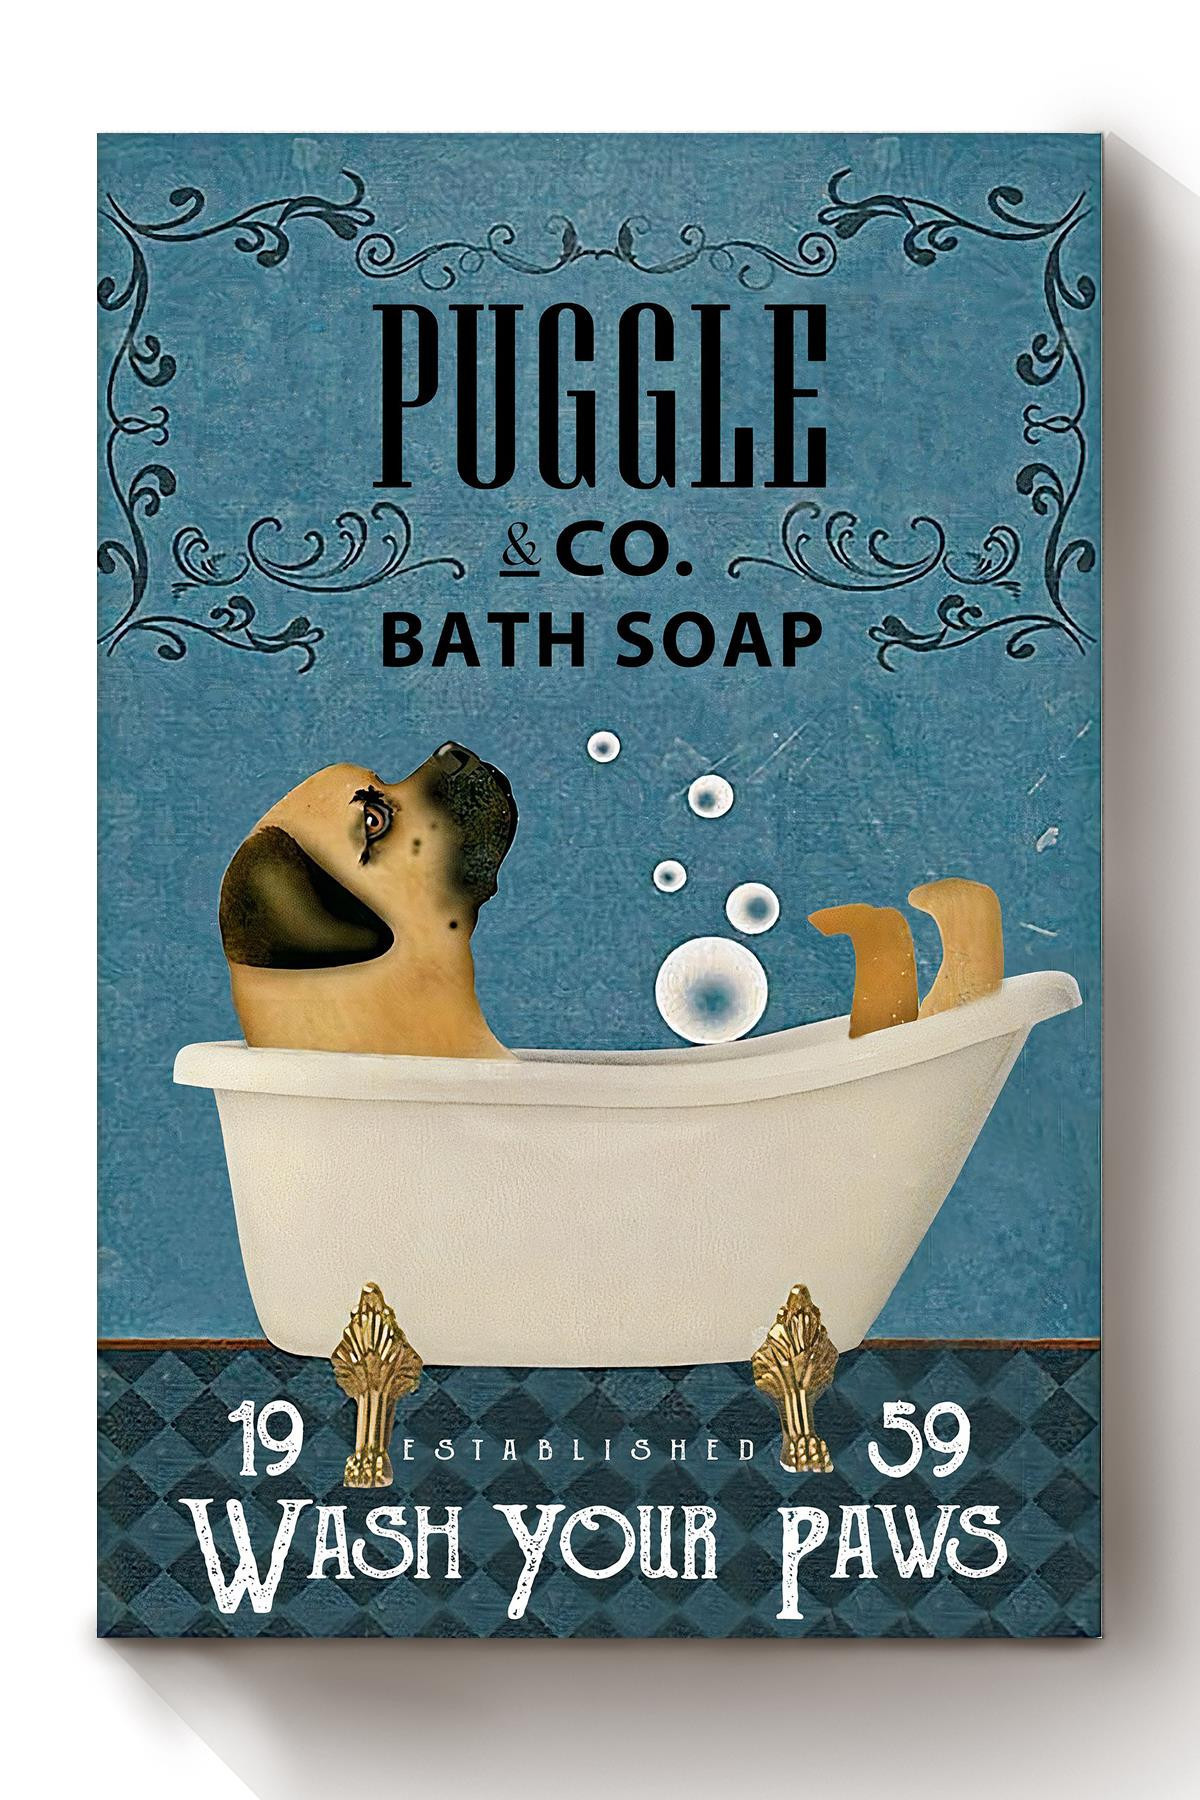 Puggle In Bath Soap Wash Your Paws Funny For Bathroom Decor Housewarming Canvas Framed Prints, Canvas Paintings Wrapped Canvas 8x10